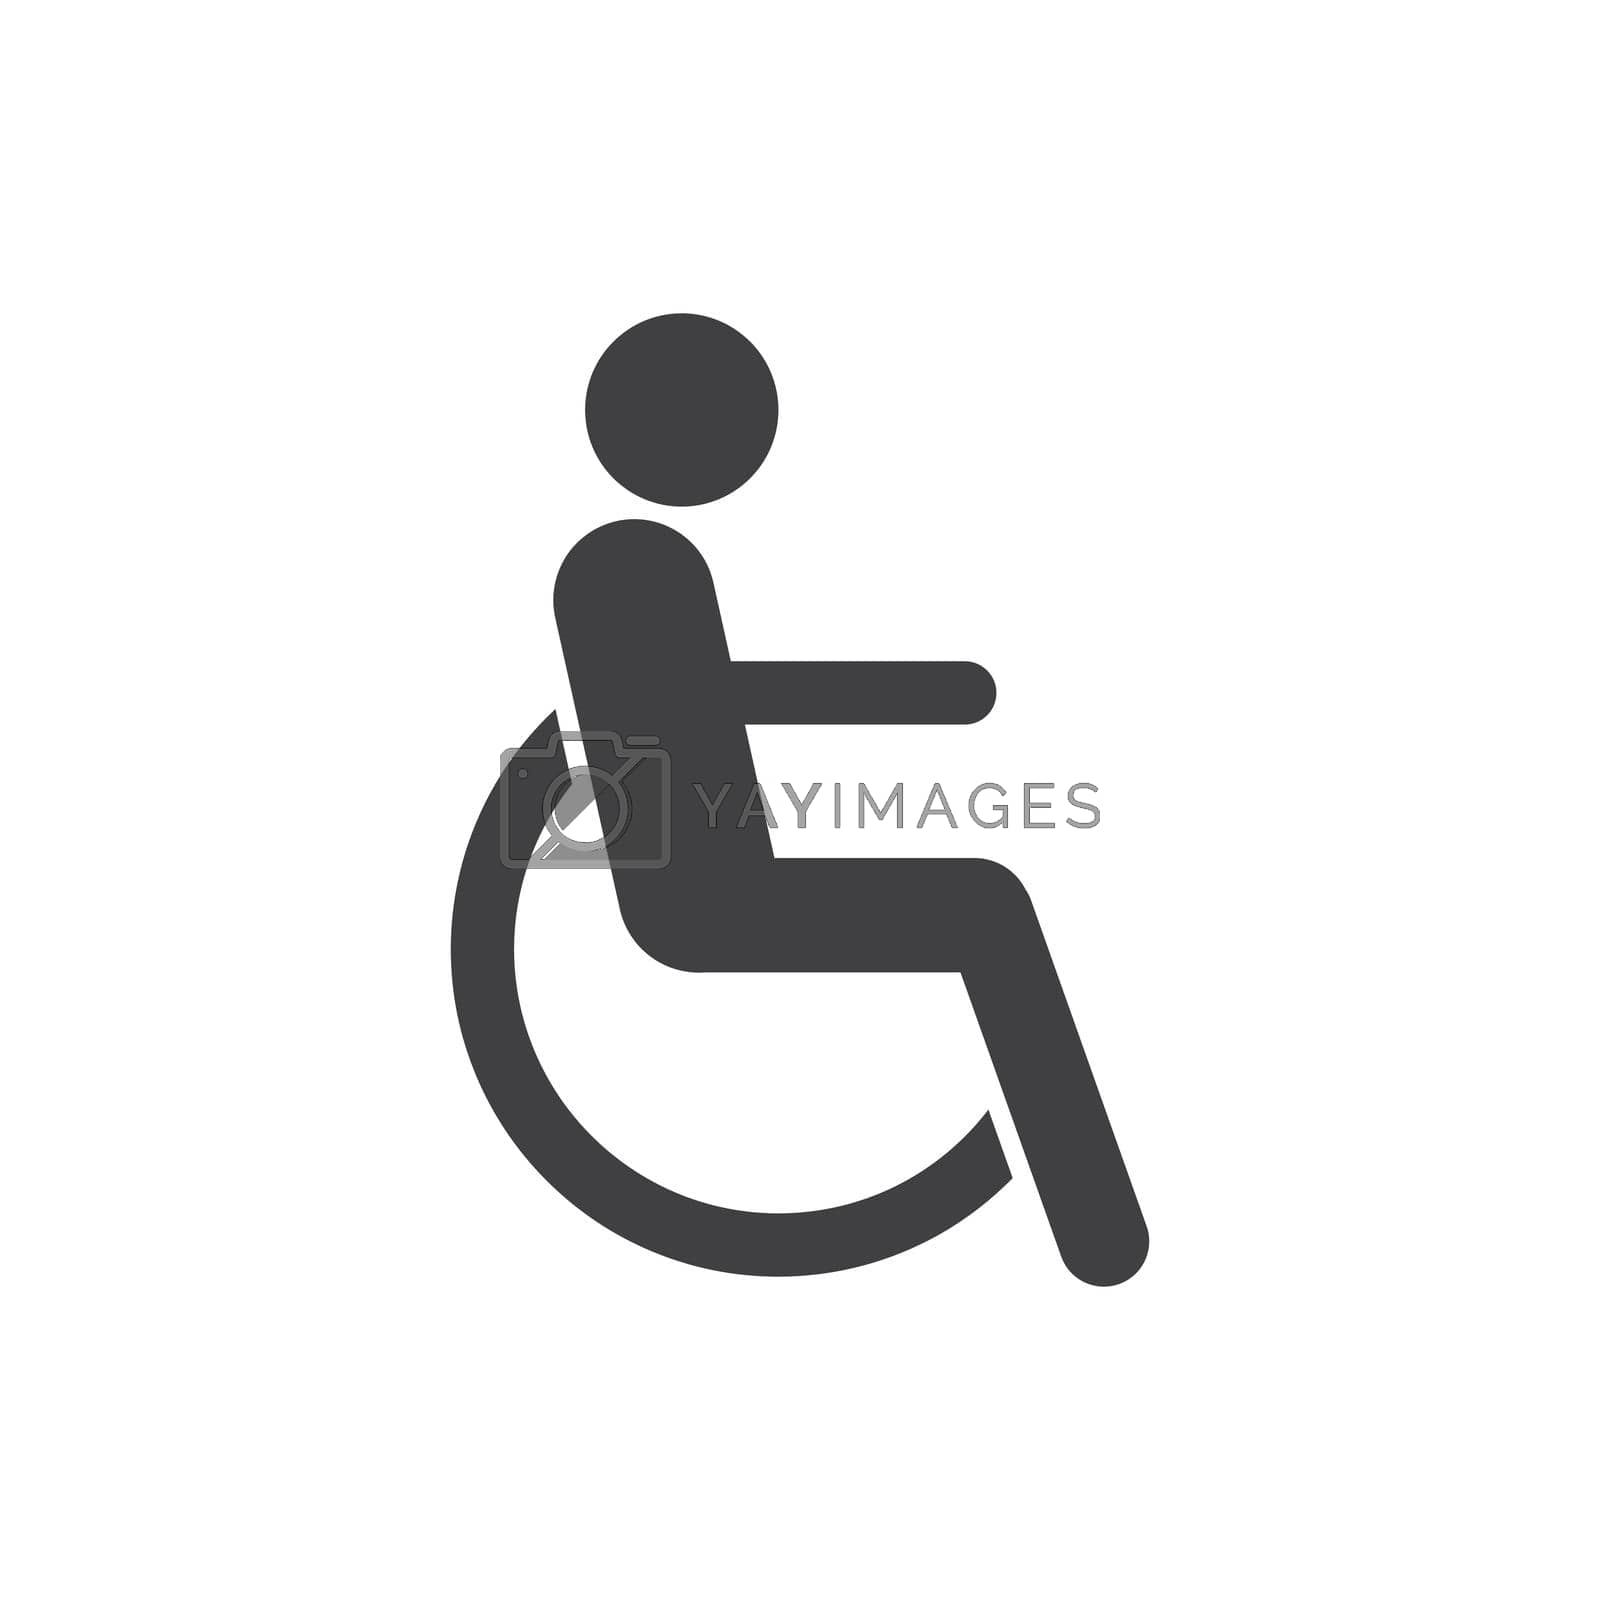 Royalty free image of wheelchair disable patient vector illustration design by idan